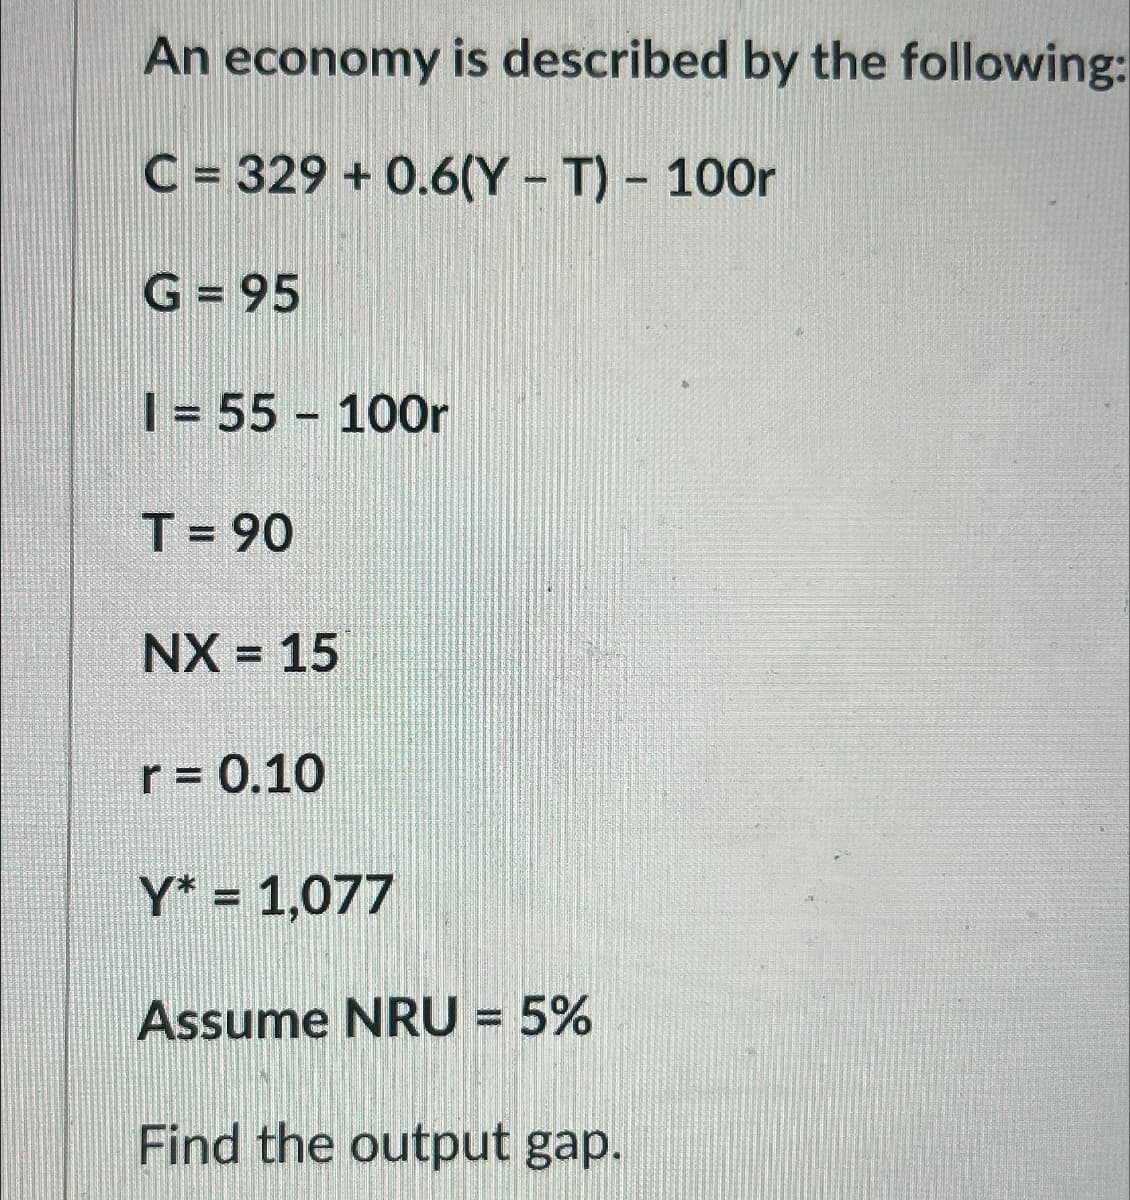 An economy is described by the following:
C = 329 +0.6(YT) - 100r
G = 95
I=55 100r
-
T = 90
NX = 15
r = 0.10
Y* = 1,077
Assume NRU = 5%
Find the output gap.